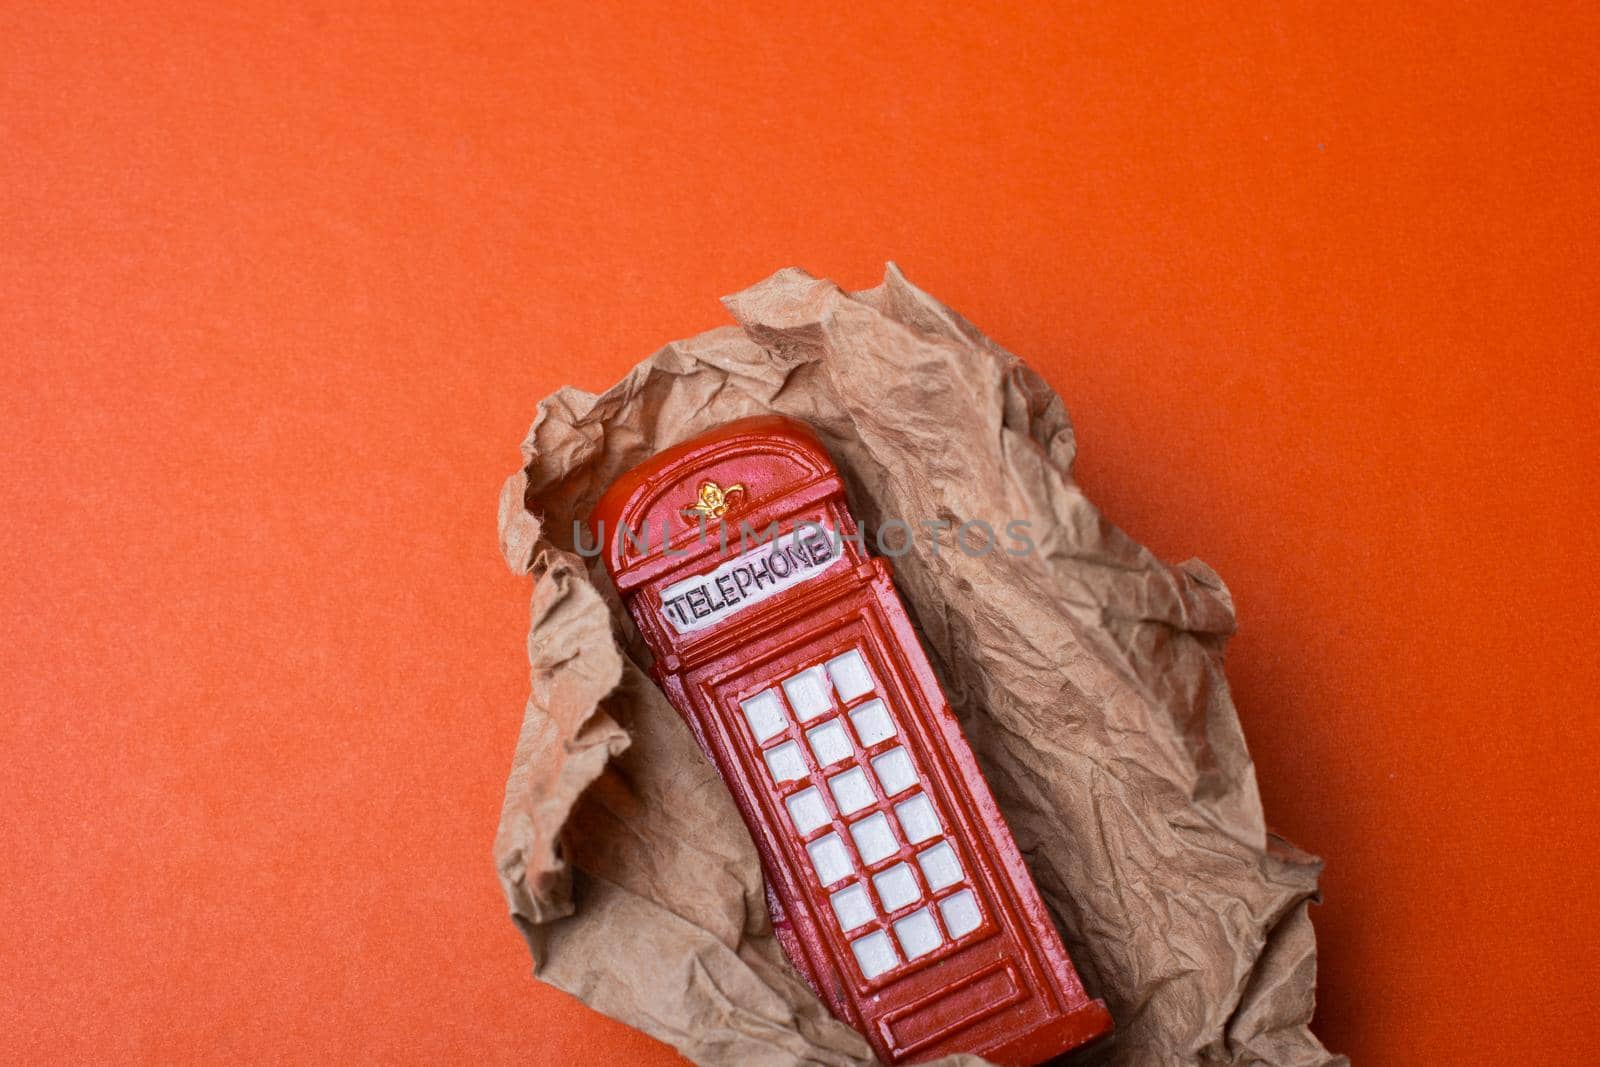 Classical British style Red phone booth on brown paper by berkay